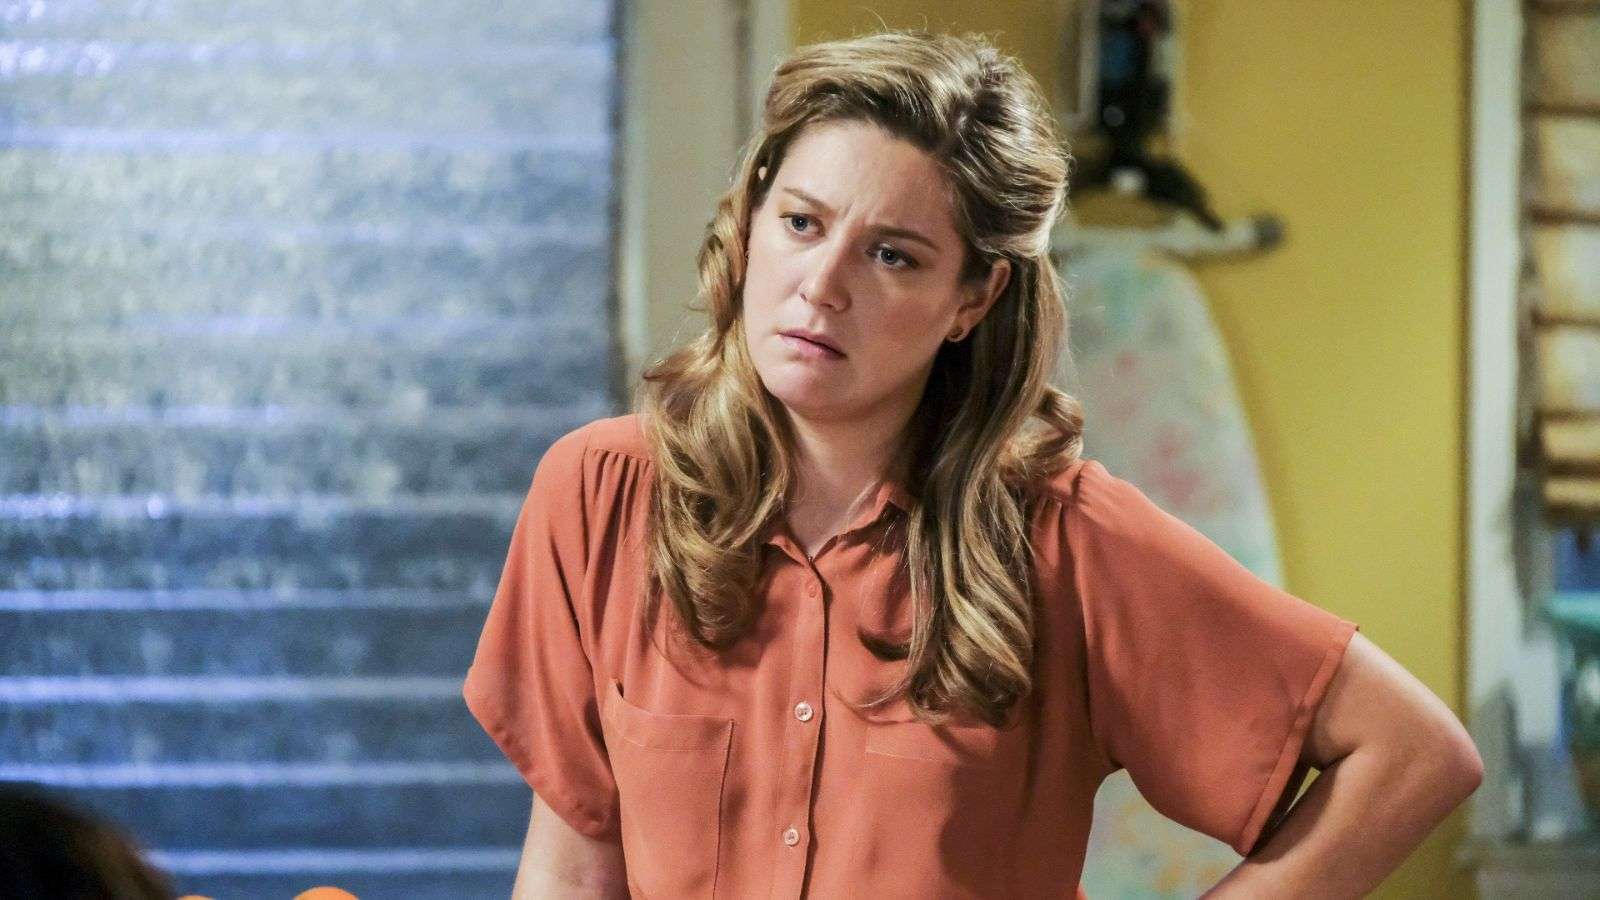 Mary Cooper in Young Sheldon